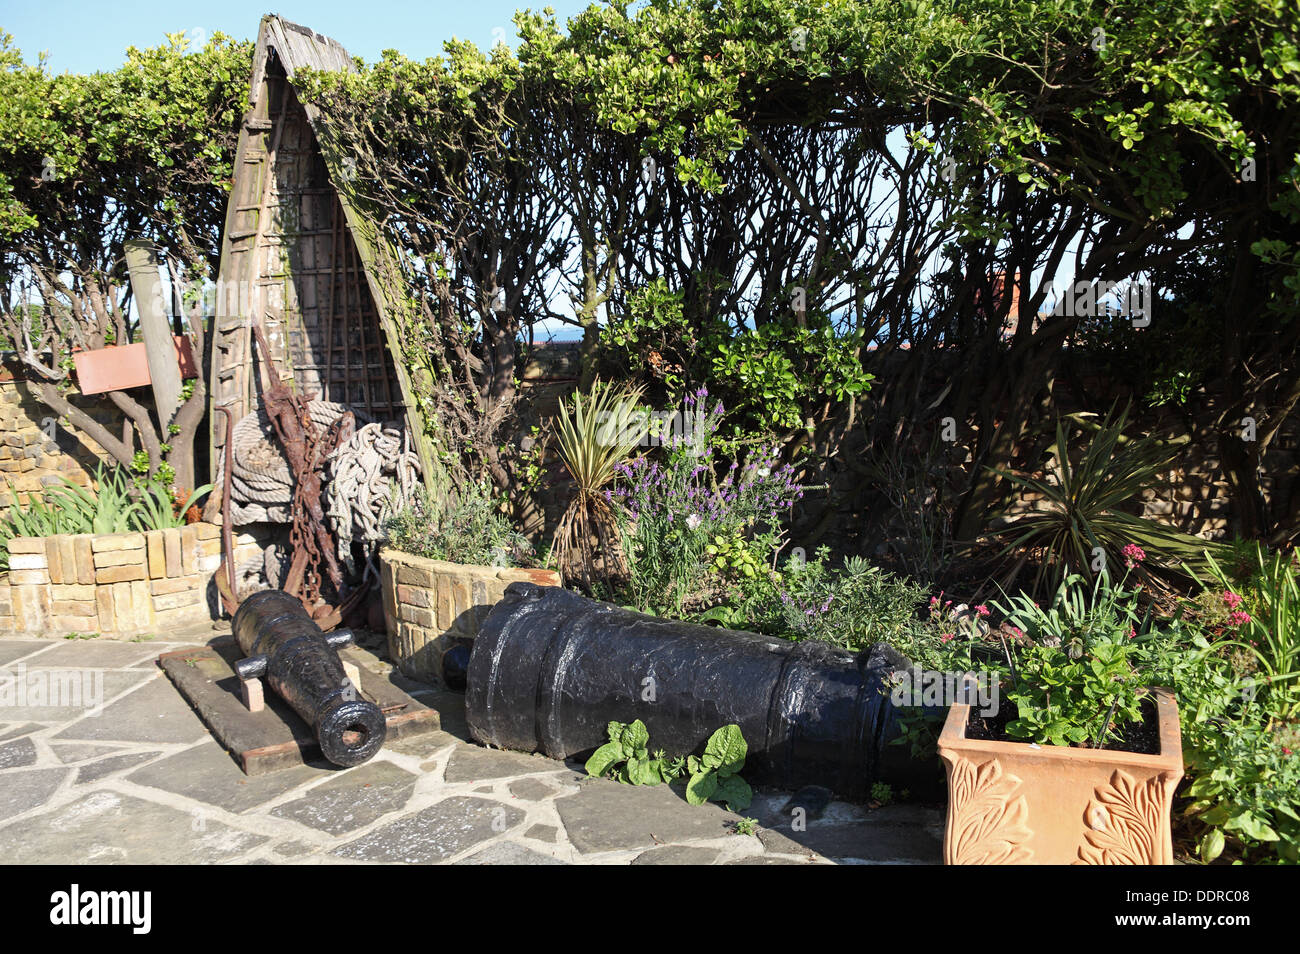 Garden with old cannon, in Charles Dickens Bleak House, Broadstairs, Kent, England Stock Photo